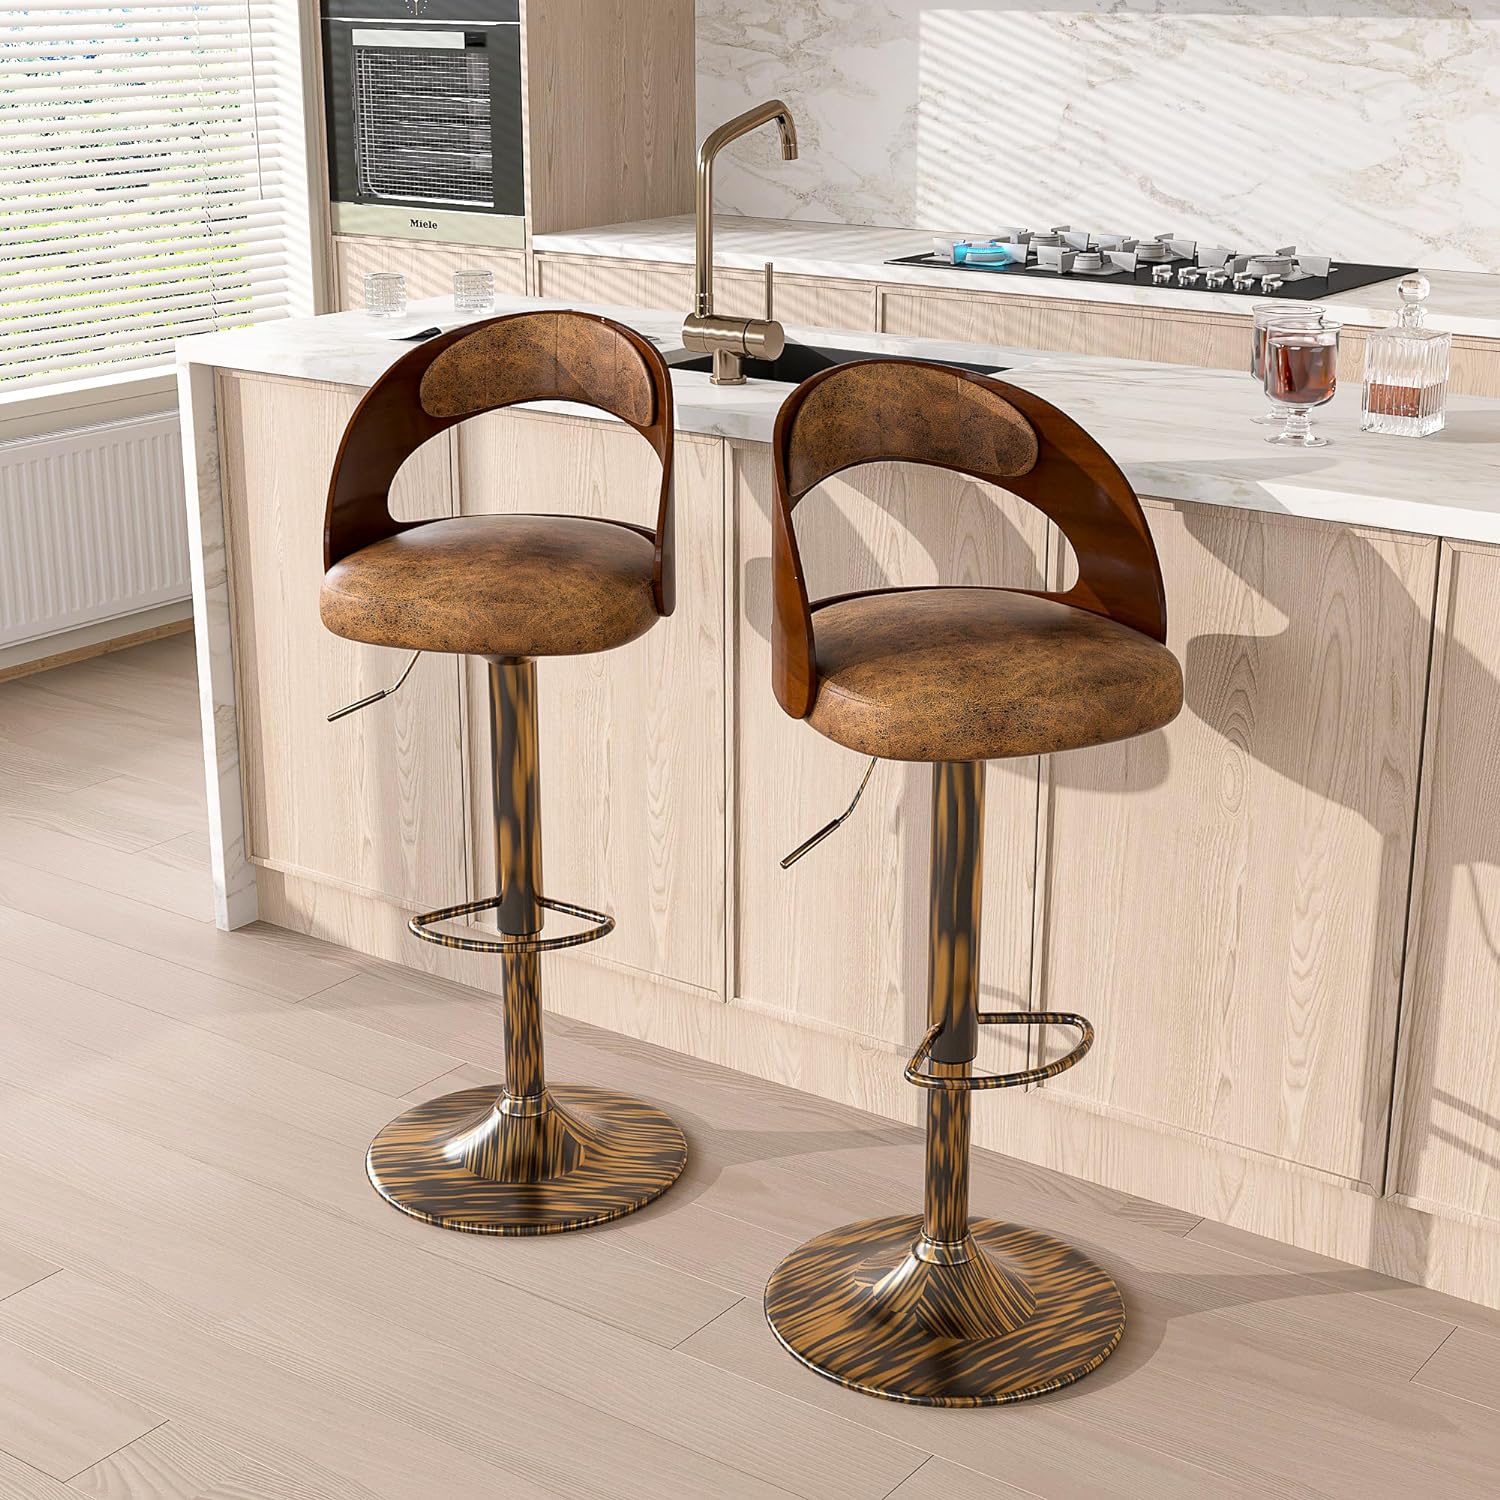 VECELO Bar Stool Set of 2, Counter Height Stools with Bentwood Back